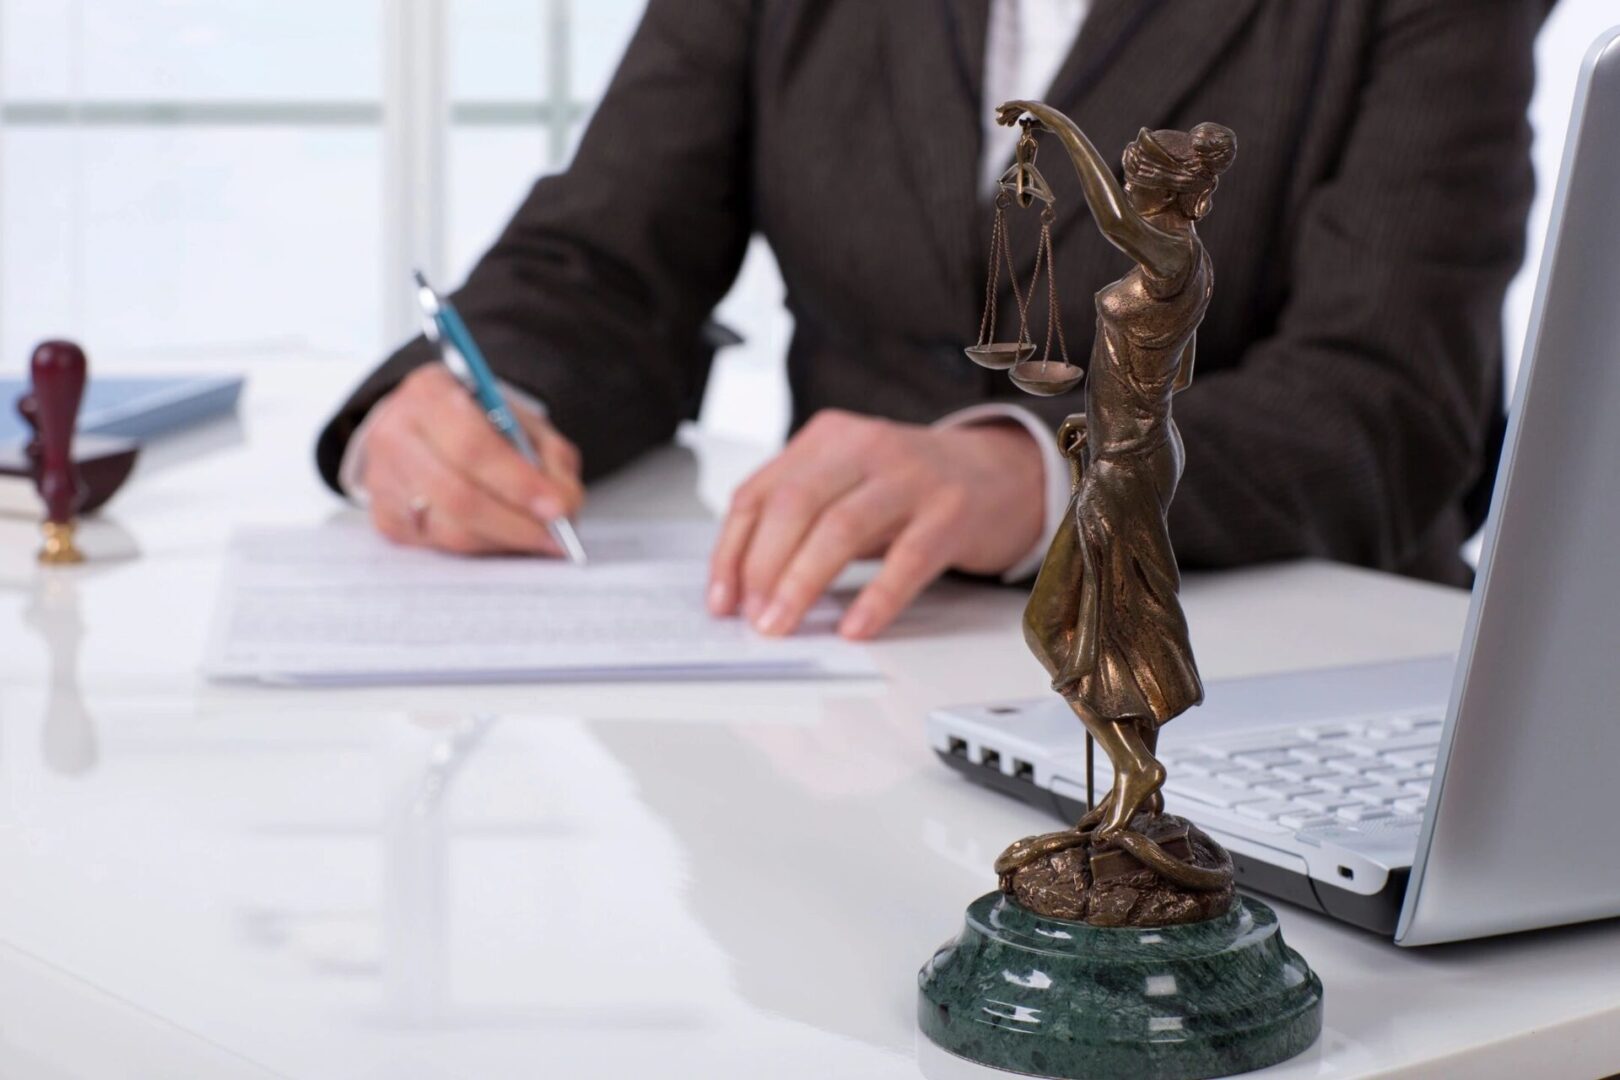 A man in suit and tie writing on paper next to statue of lady justice.